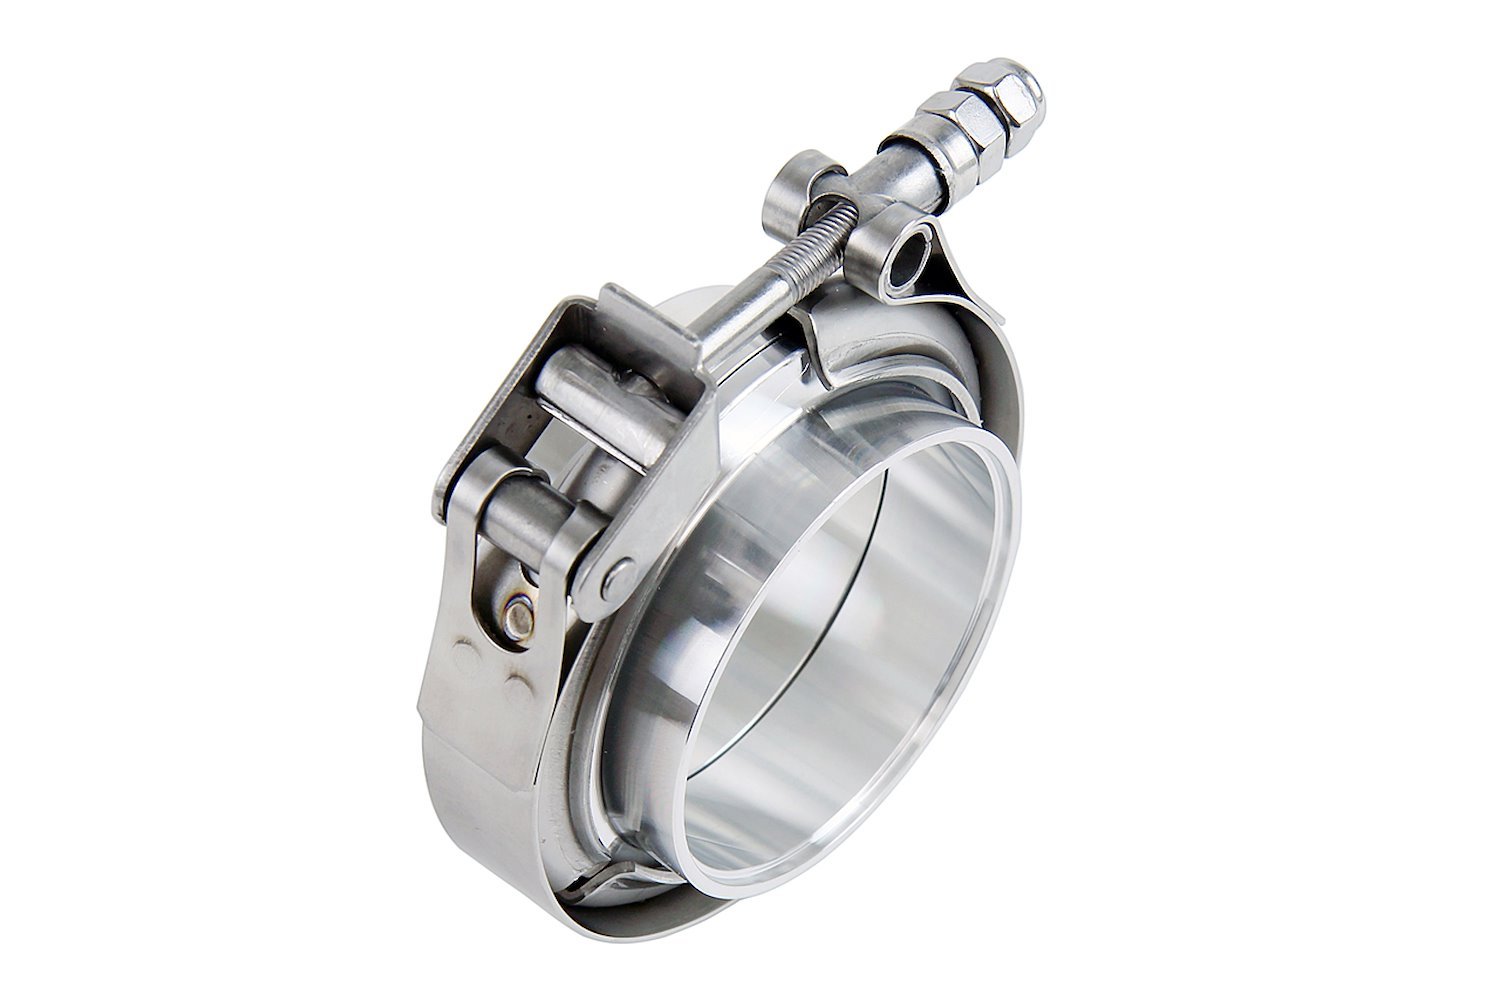 VCKIT-AL-450 V-Band Clamp w/ Interlocking Aluminum Flanges, For 4.5 in. OD Tubing.